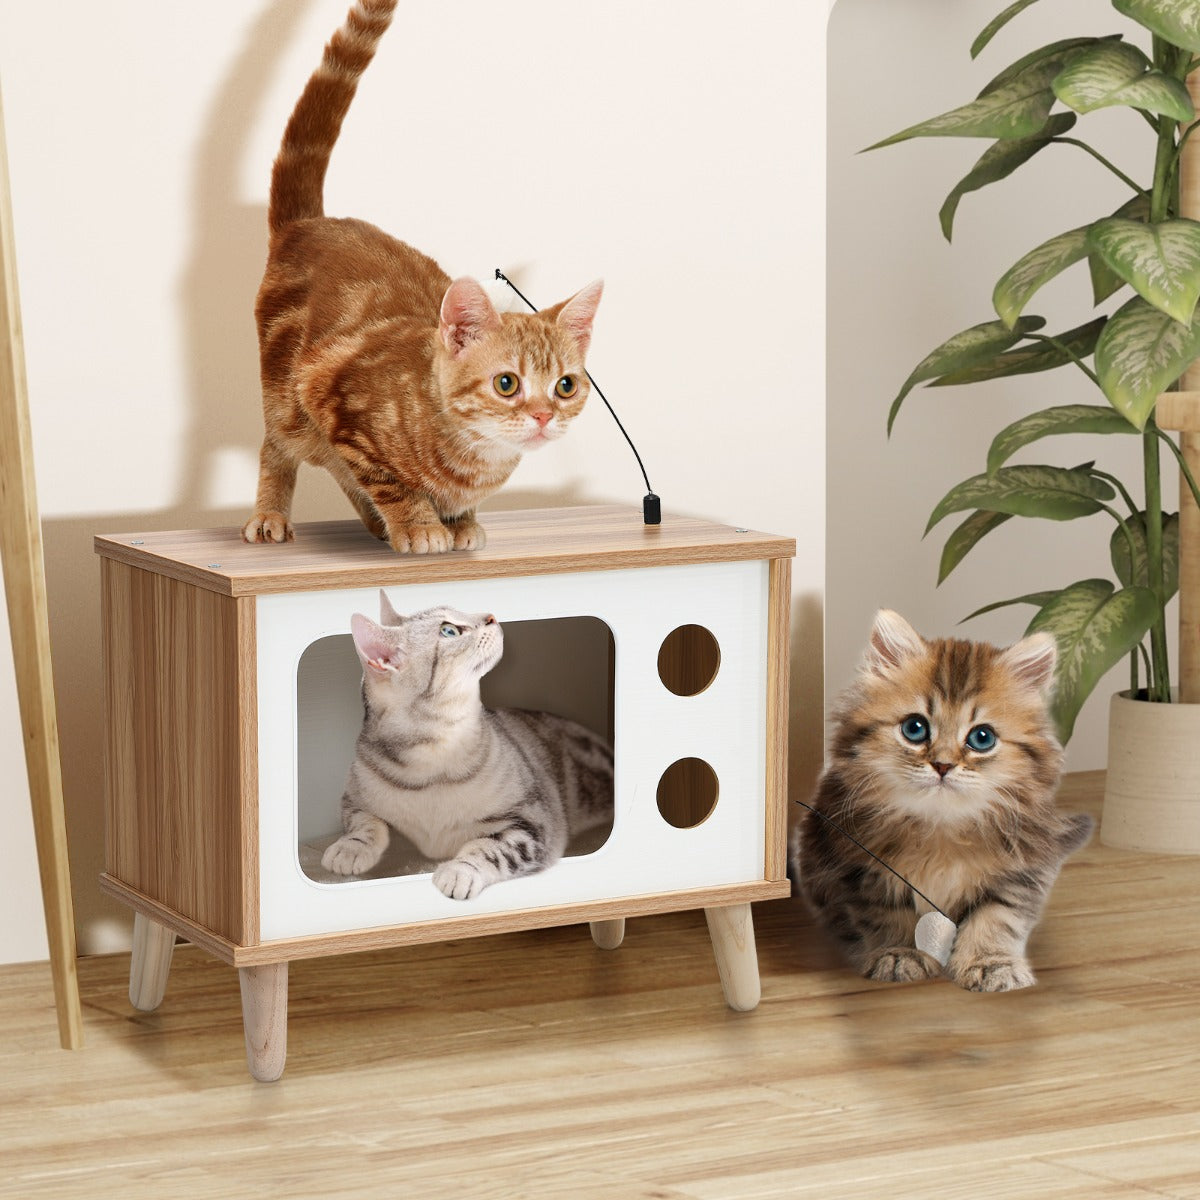 Cat House TV Shaped Bed with Scratching Pad for Living Room